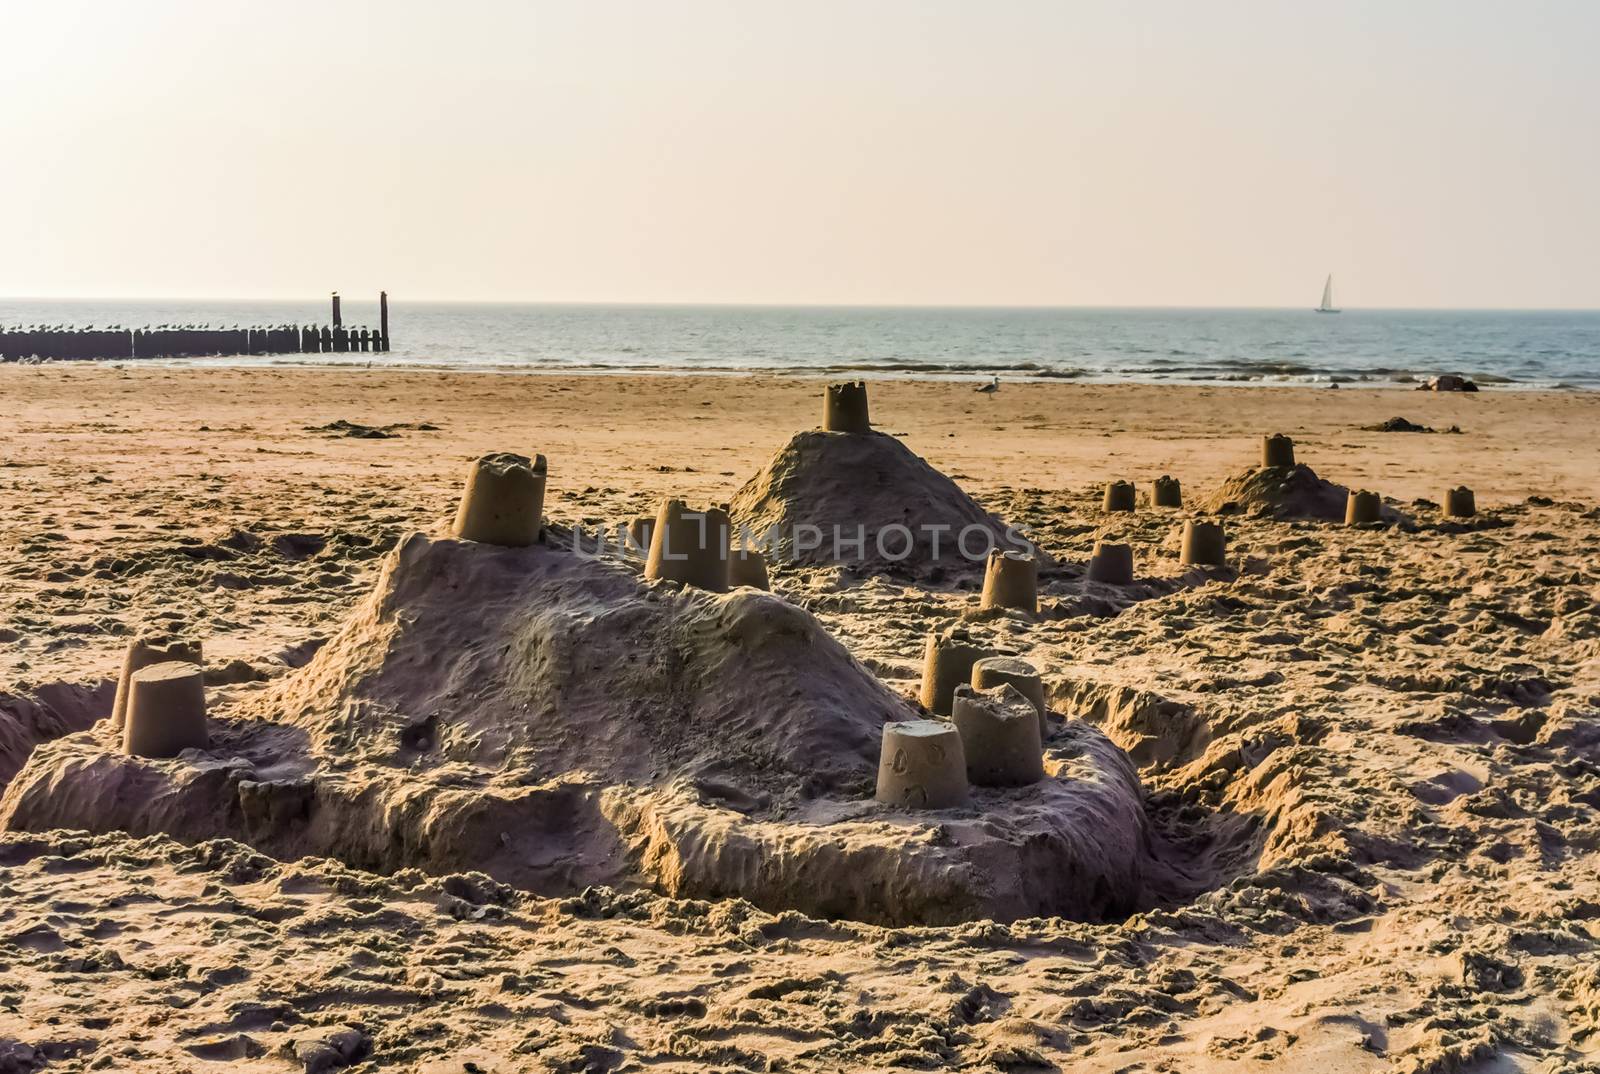 sand castle buildings on the beach with the ocean in the background, summer season and holidays